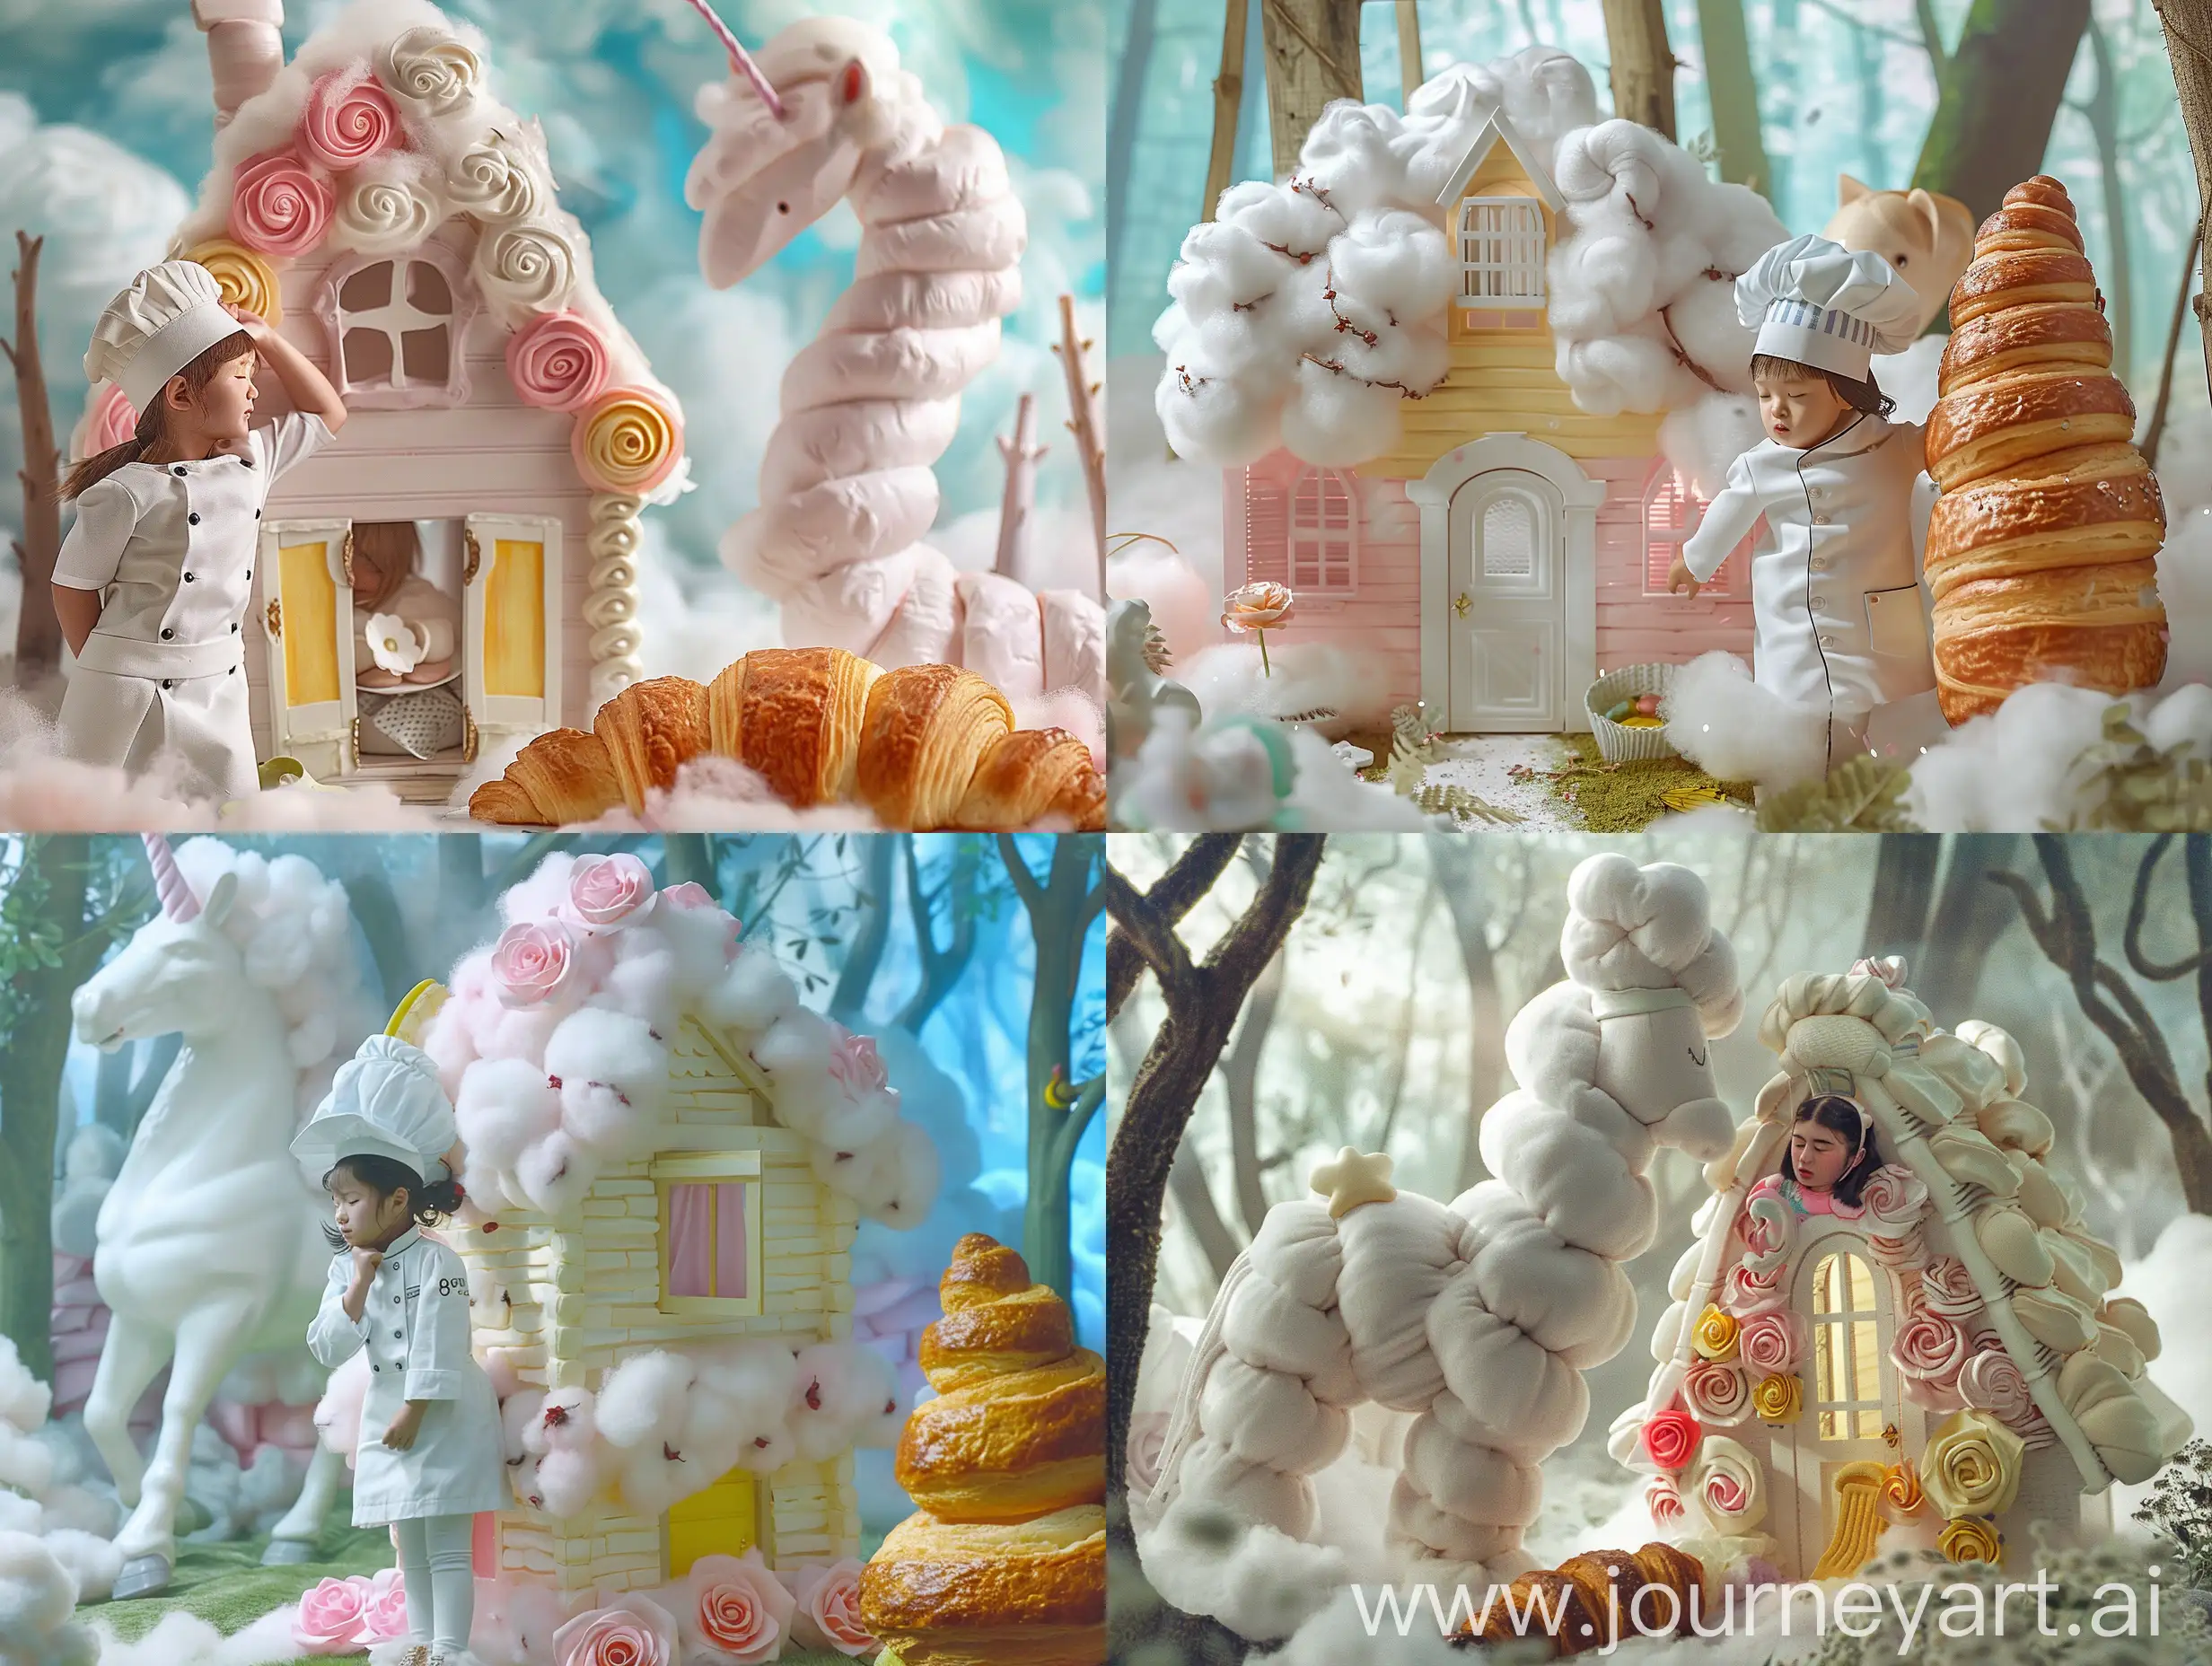 Enchanting-Cotton-Candy-House-with-Giant-Croissant-Fairy-Tale-Fantasy-Art